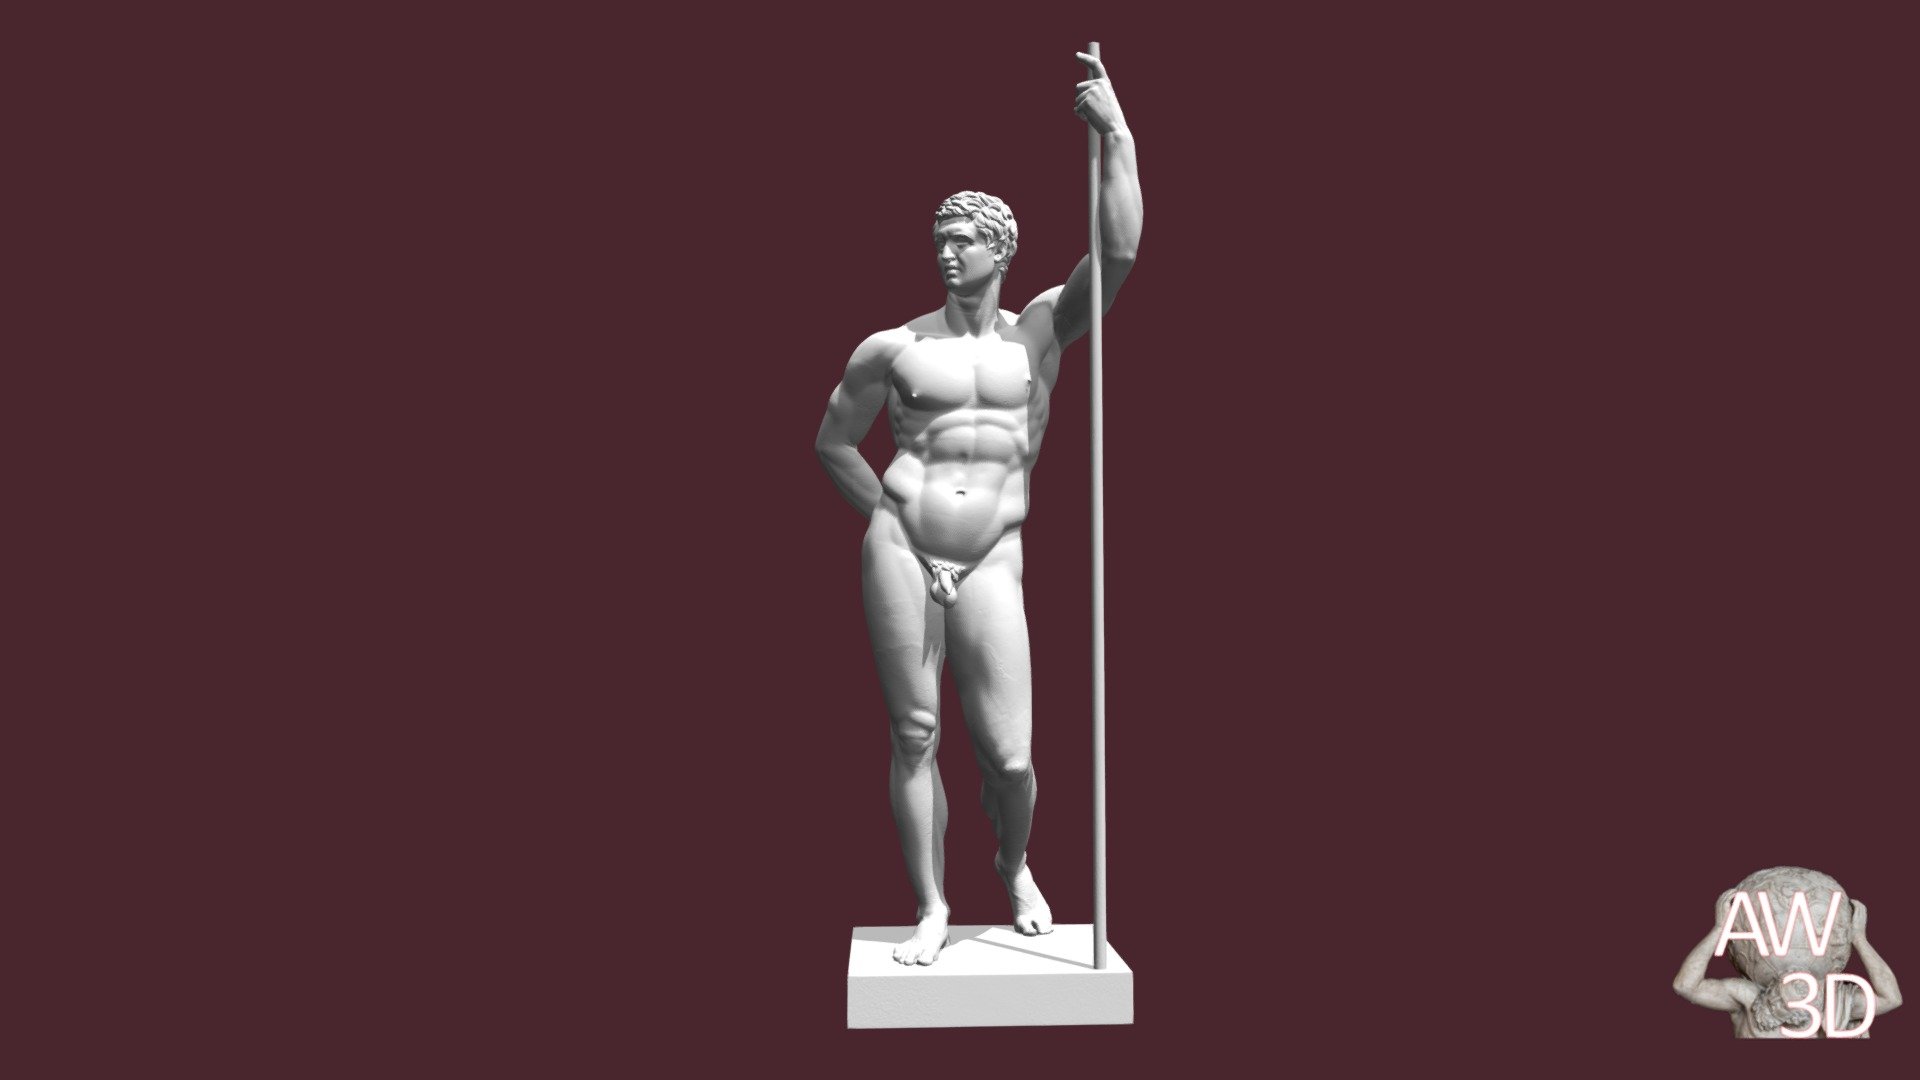 This is a 3D model of a cast of the Terme Ruler, an ancient bronze statue in the Museo Nazionale Palazzo Massimo in Rome. The cast is made of plaster and is in Statens Musueum for Kunst in Copenhagen, Denmark. The Terme Ruler depicts a man with a disproportionately muscular body, especially when compared to its more modestly shaped head. Estimations date this statue to near the 2nd century BCE, comparing it to the Terme Boxer, particularly in hair style.

Bibliography: “The ‘Hellenistic Ruler’ of the Terme Museum”

Ancient World 3D
This model posting is part of Ancient World 3D, a project that provides curated 3D open access content for Classical Studies. Each model has an etched catalog# and 3D Printable frame for building a library. The original model was posted by Statens Museum for Kunst. This entry was composed by Joshua Mefford (Dr. Elizabeth Thill, advisor) 3d model